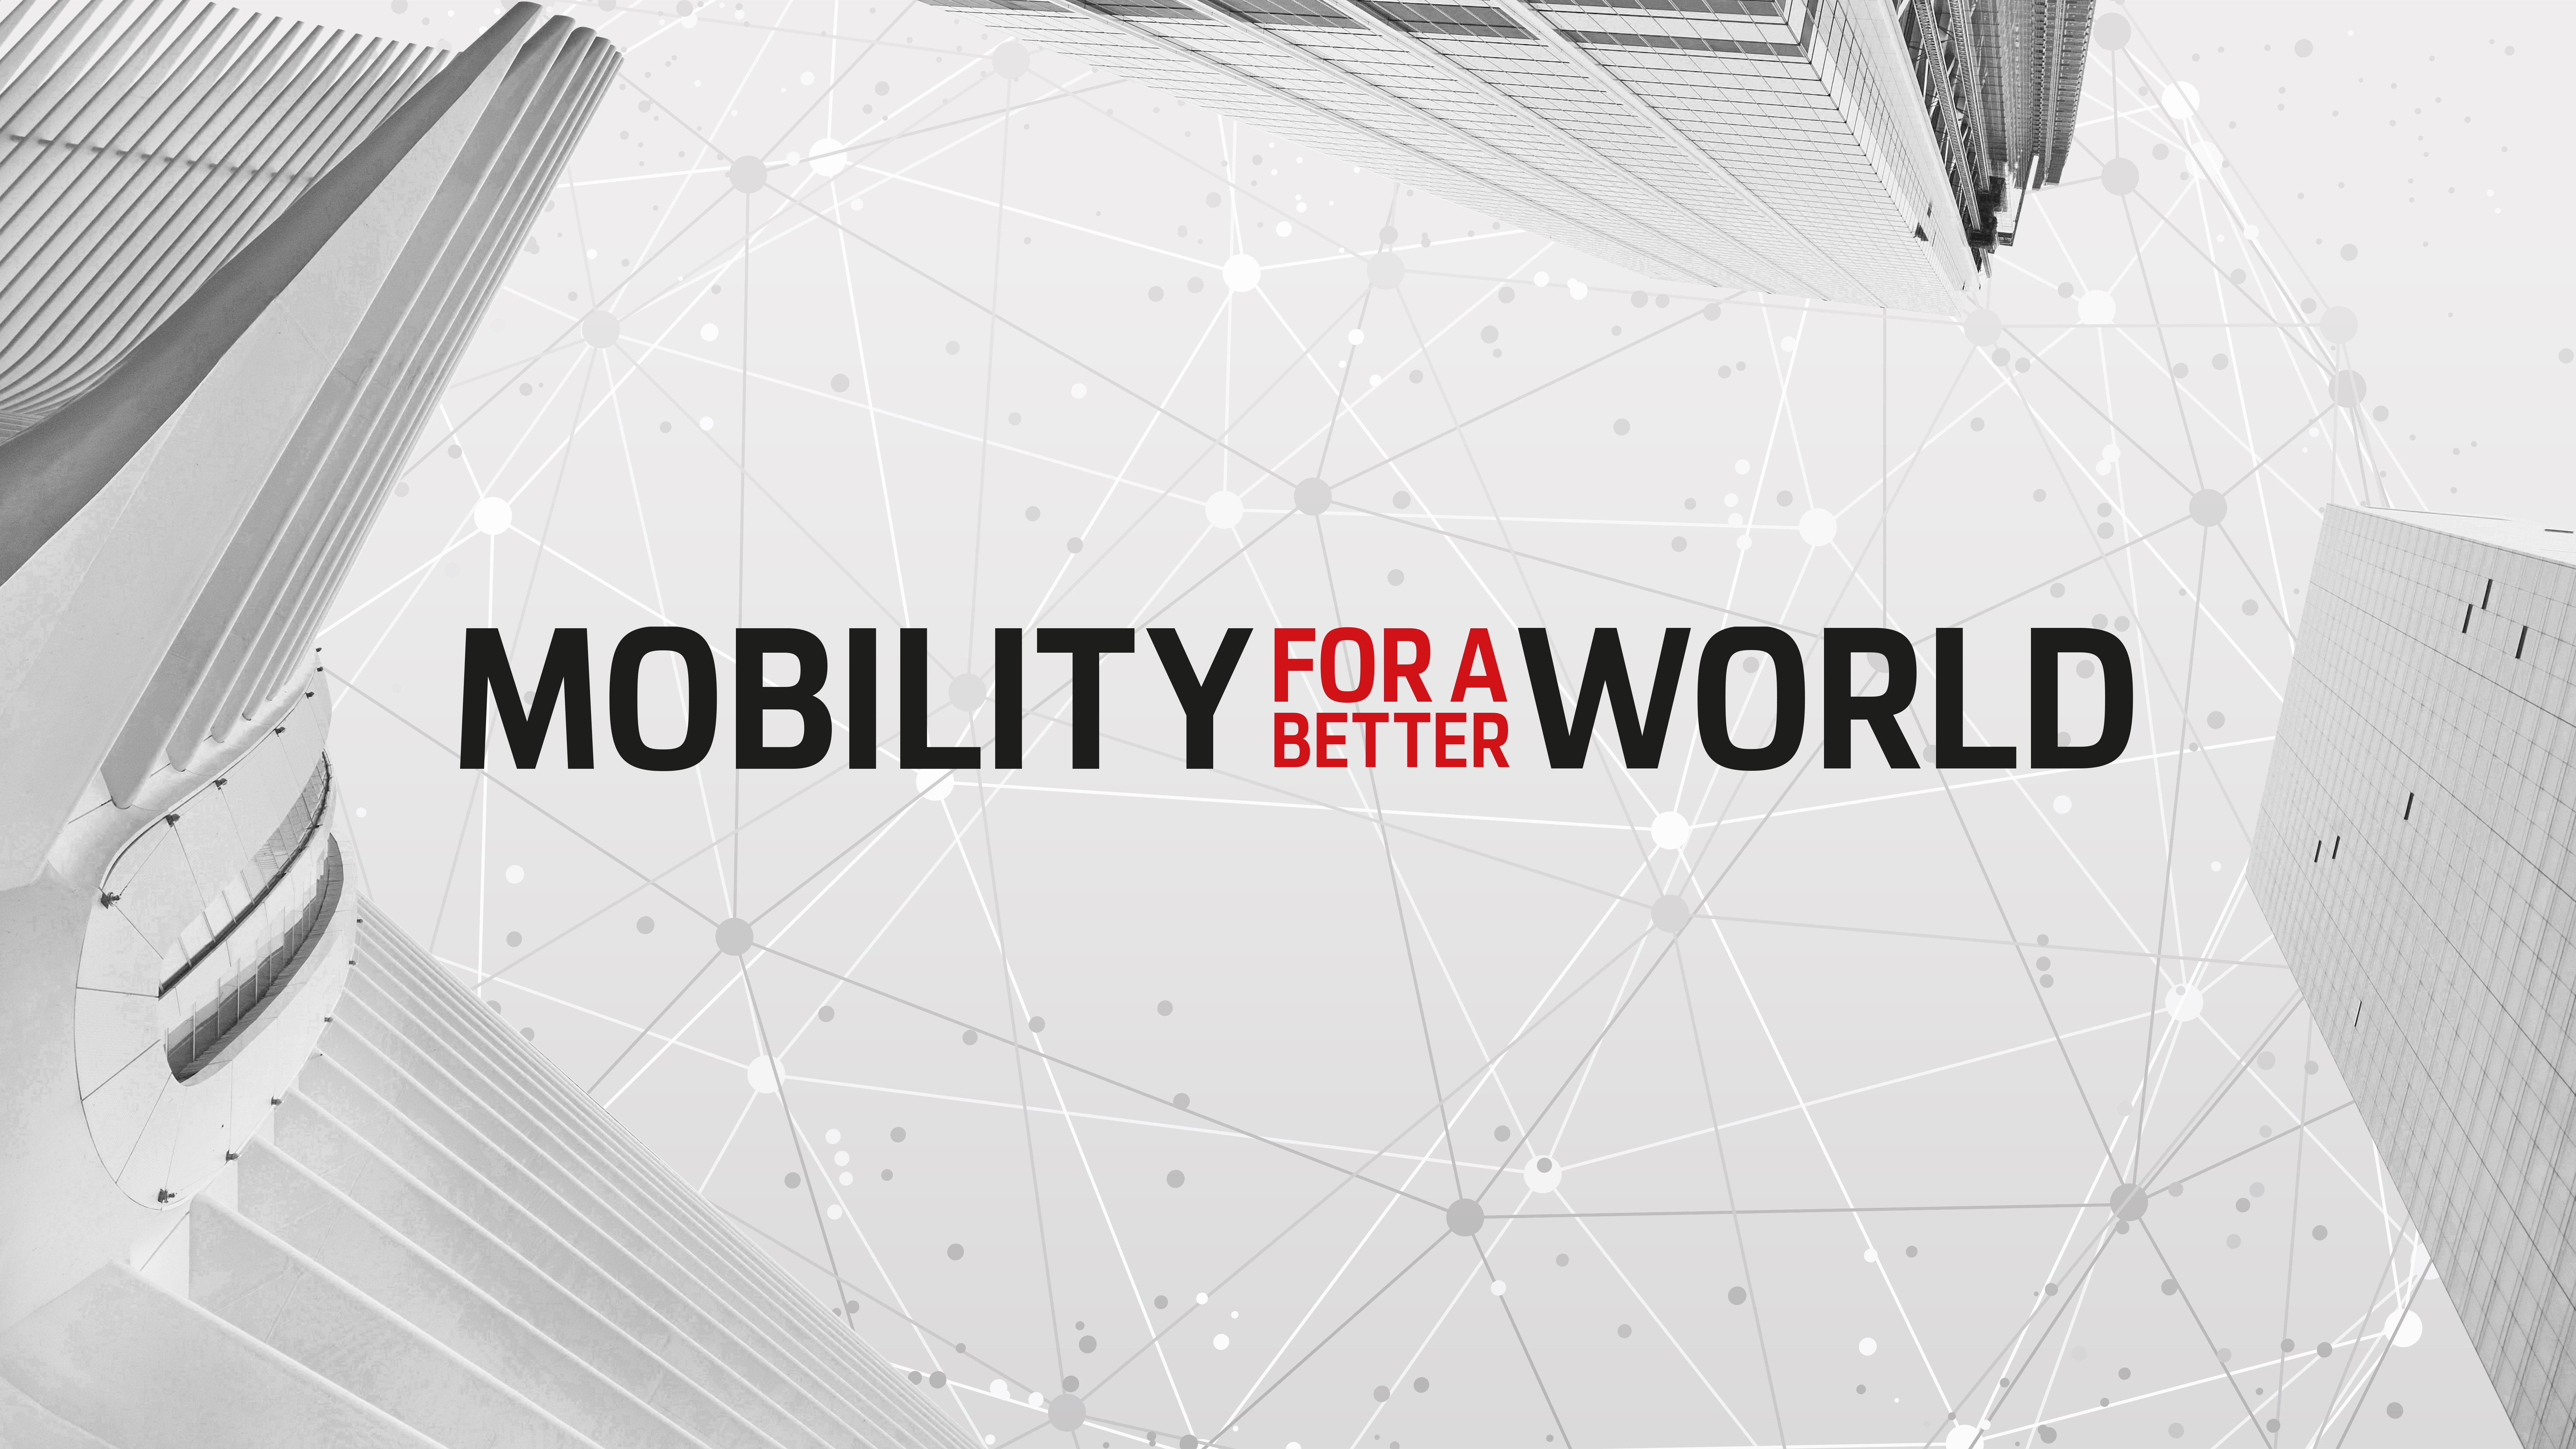 Ideas competition for sustainable mobility ‘Mobility for a Better World’, 2019, Porsche AG